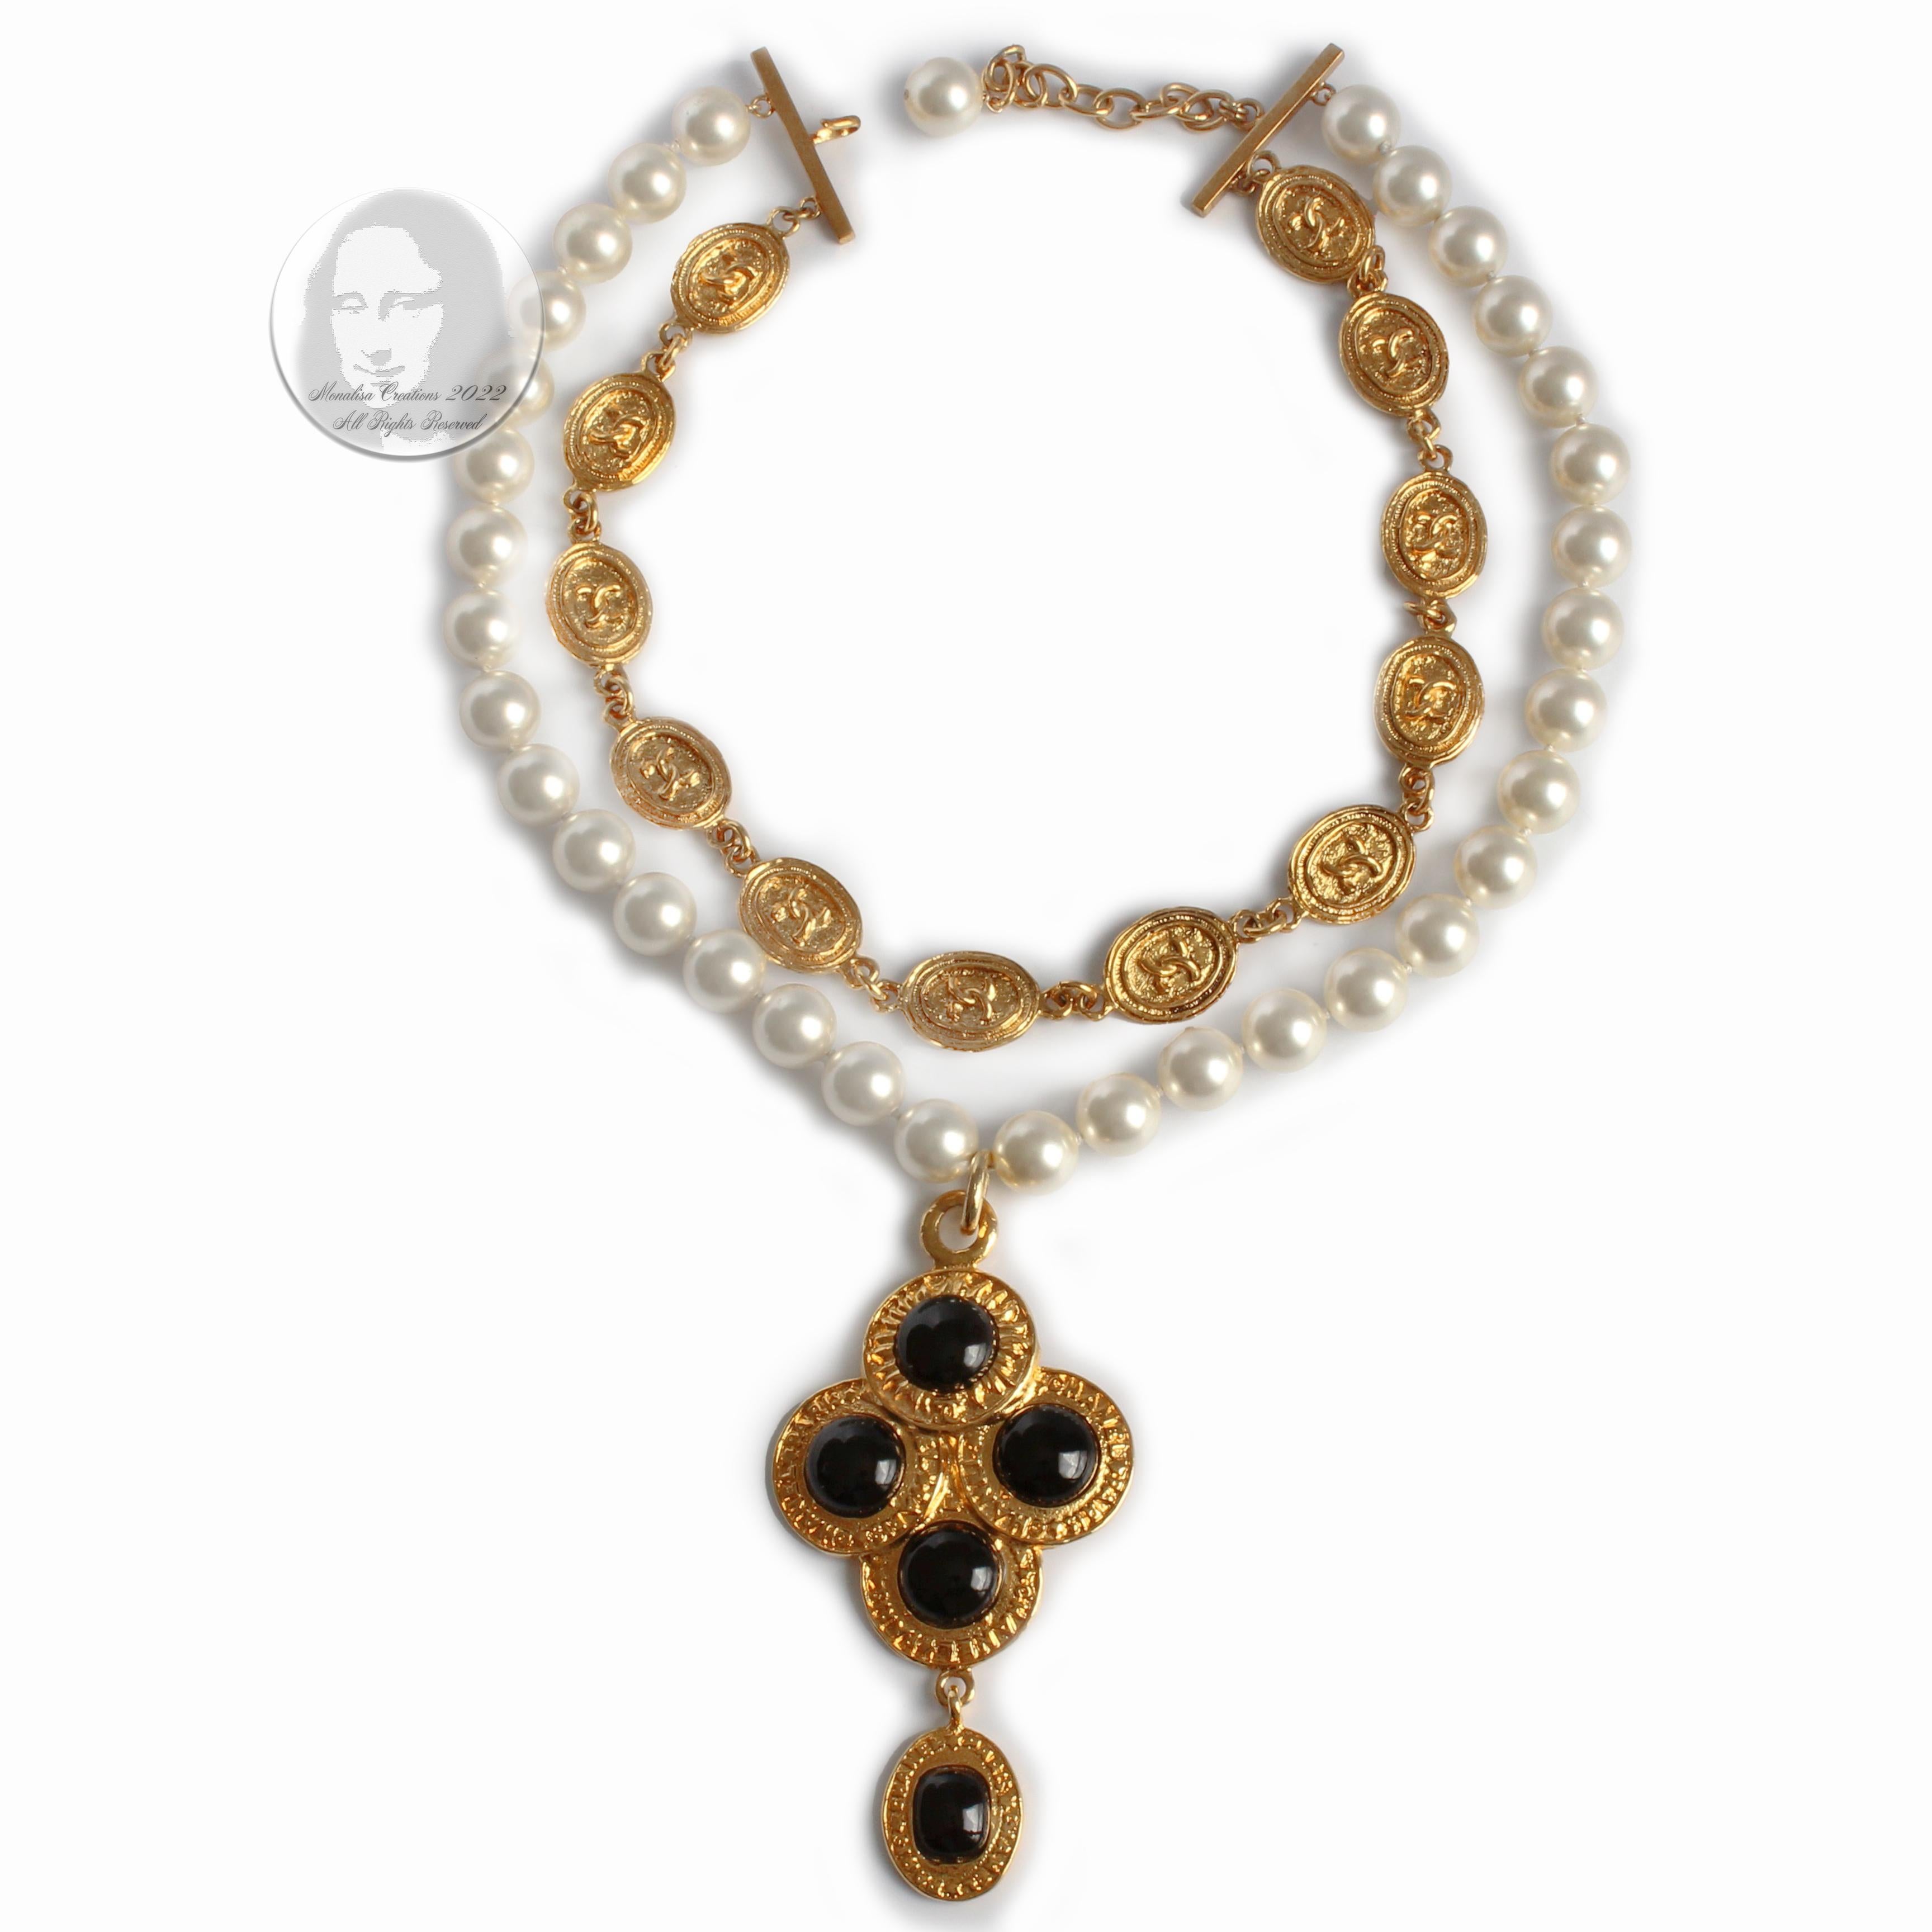 Authentic, preowned, vintage Chanel pendant choker necklace, from the 1991 Season 2 8 collection. The necklace is double-strand with one row of faux pearls and a shorter string of gold CC logo medallions, which fasten with a hook and faux pearl